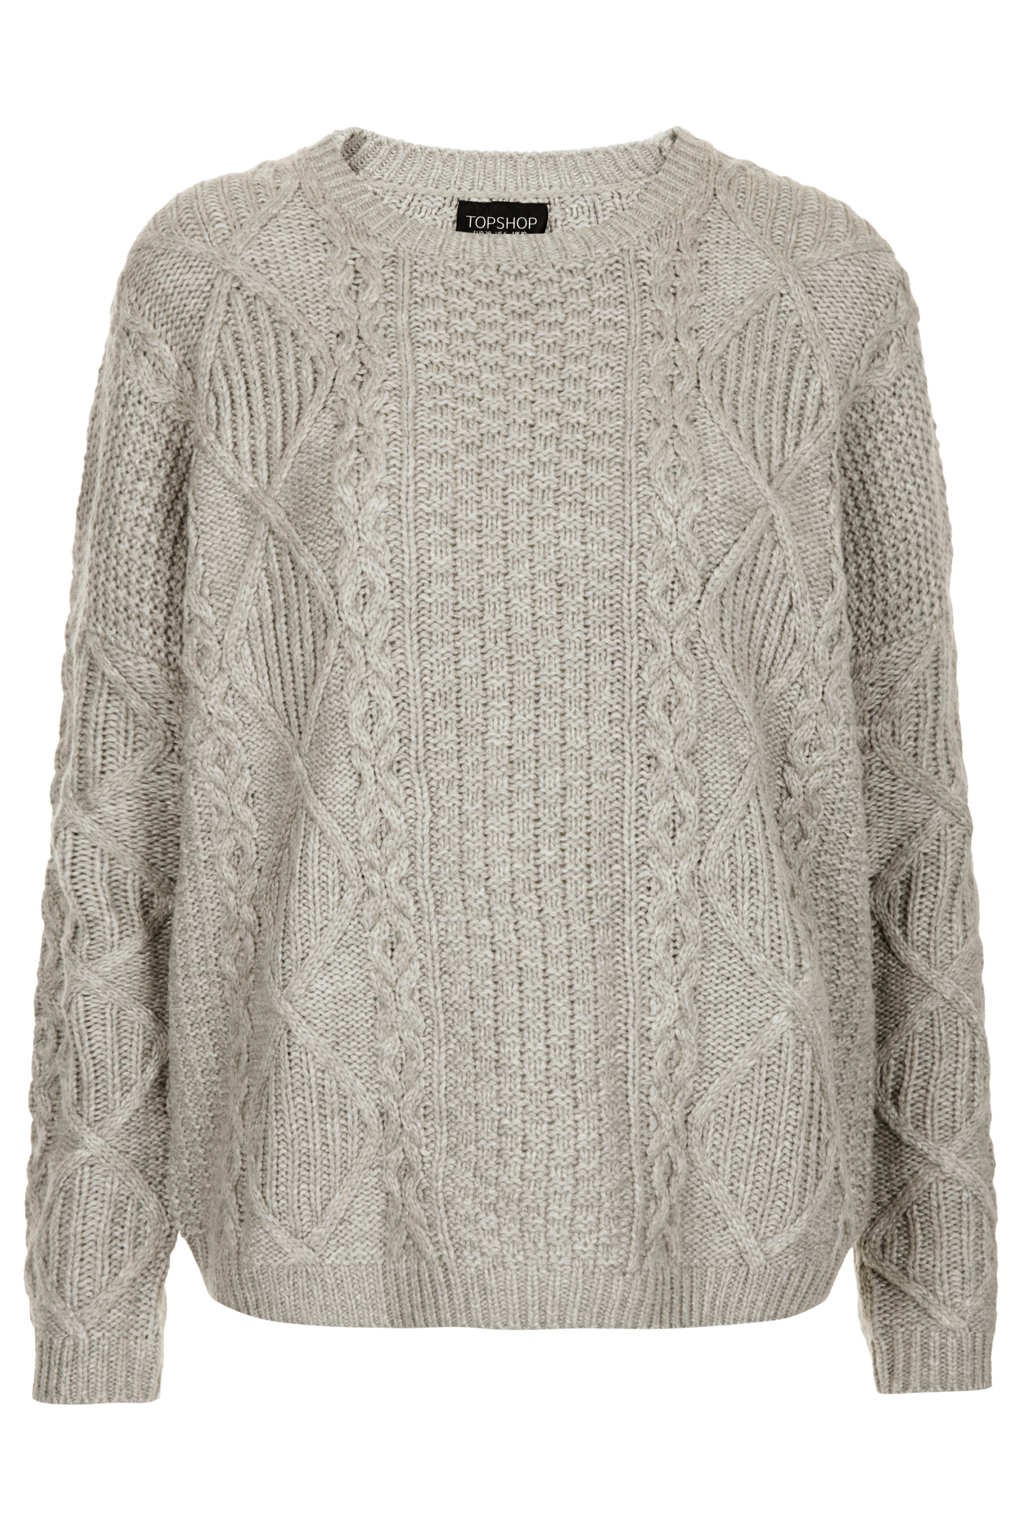 Lyst - Topshop Knitted Angora Cable Jumper in Gray